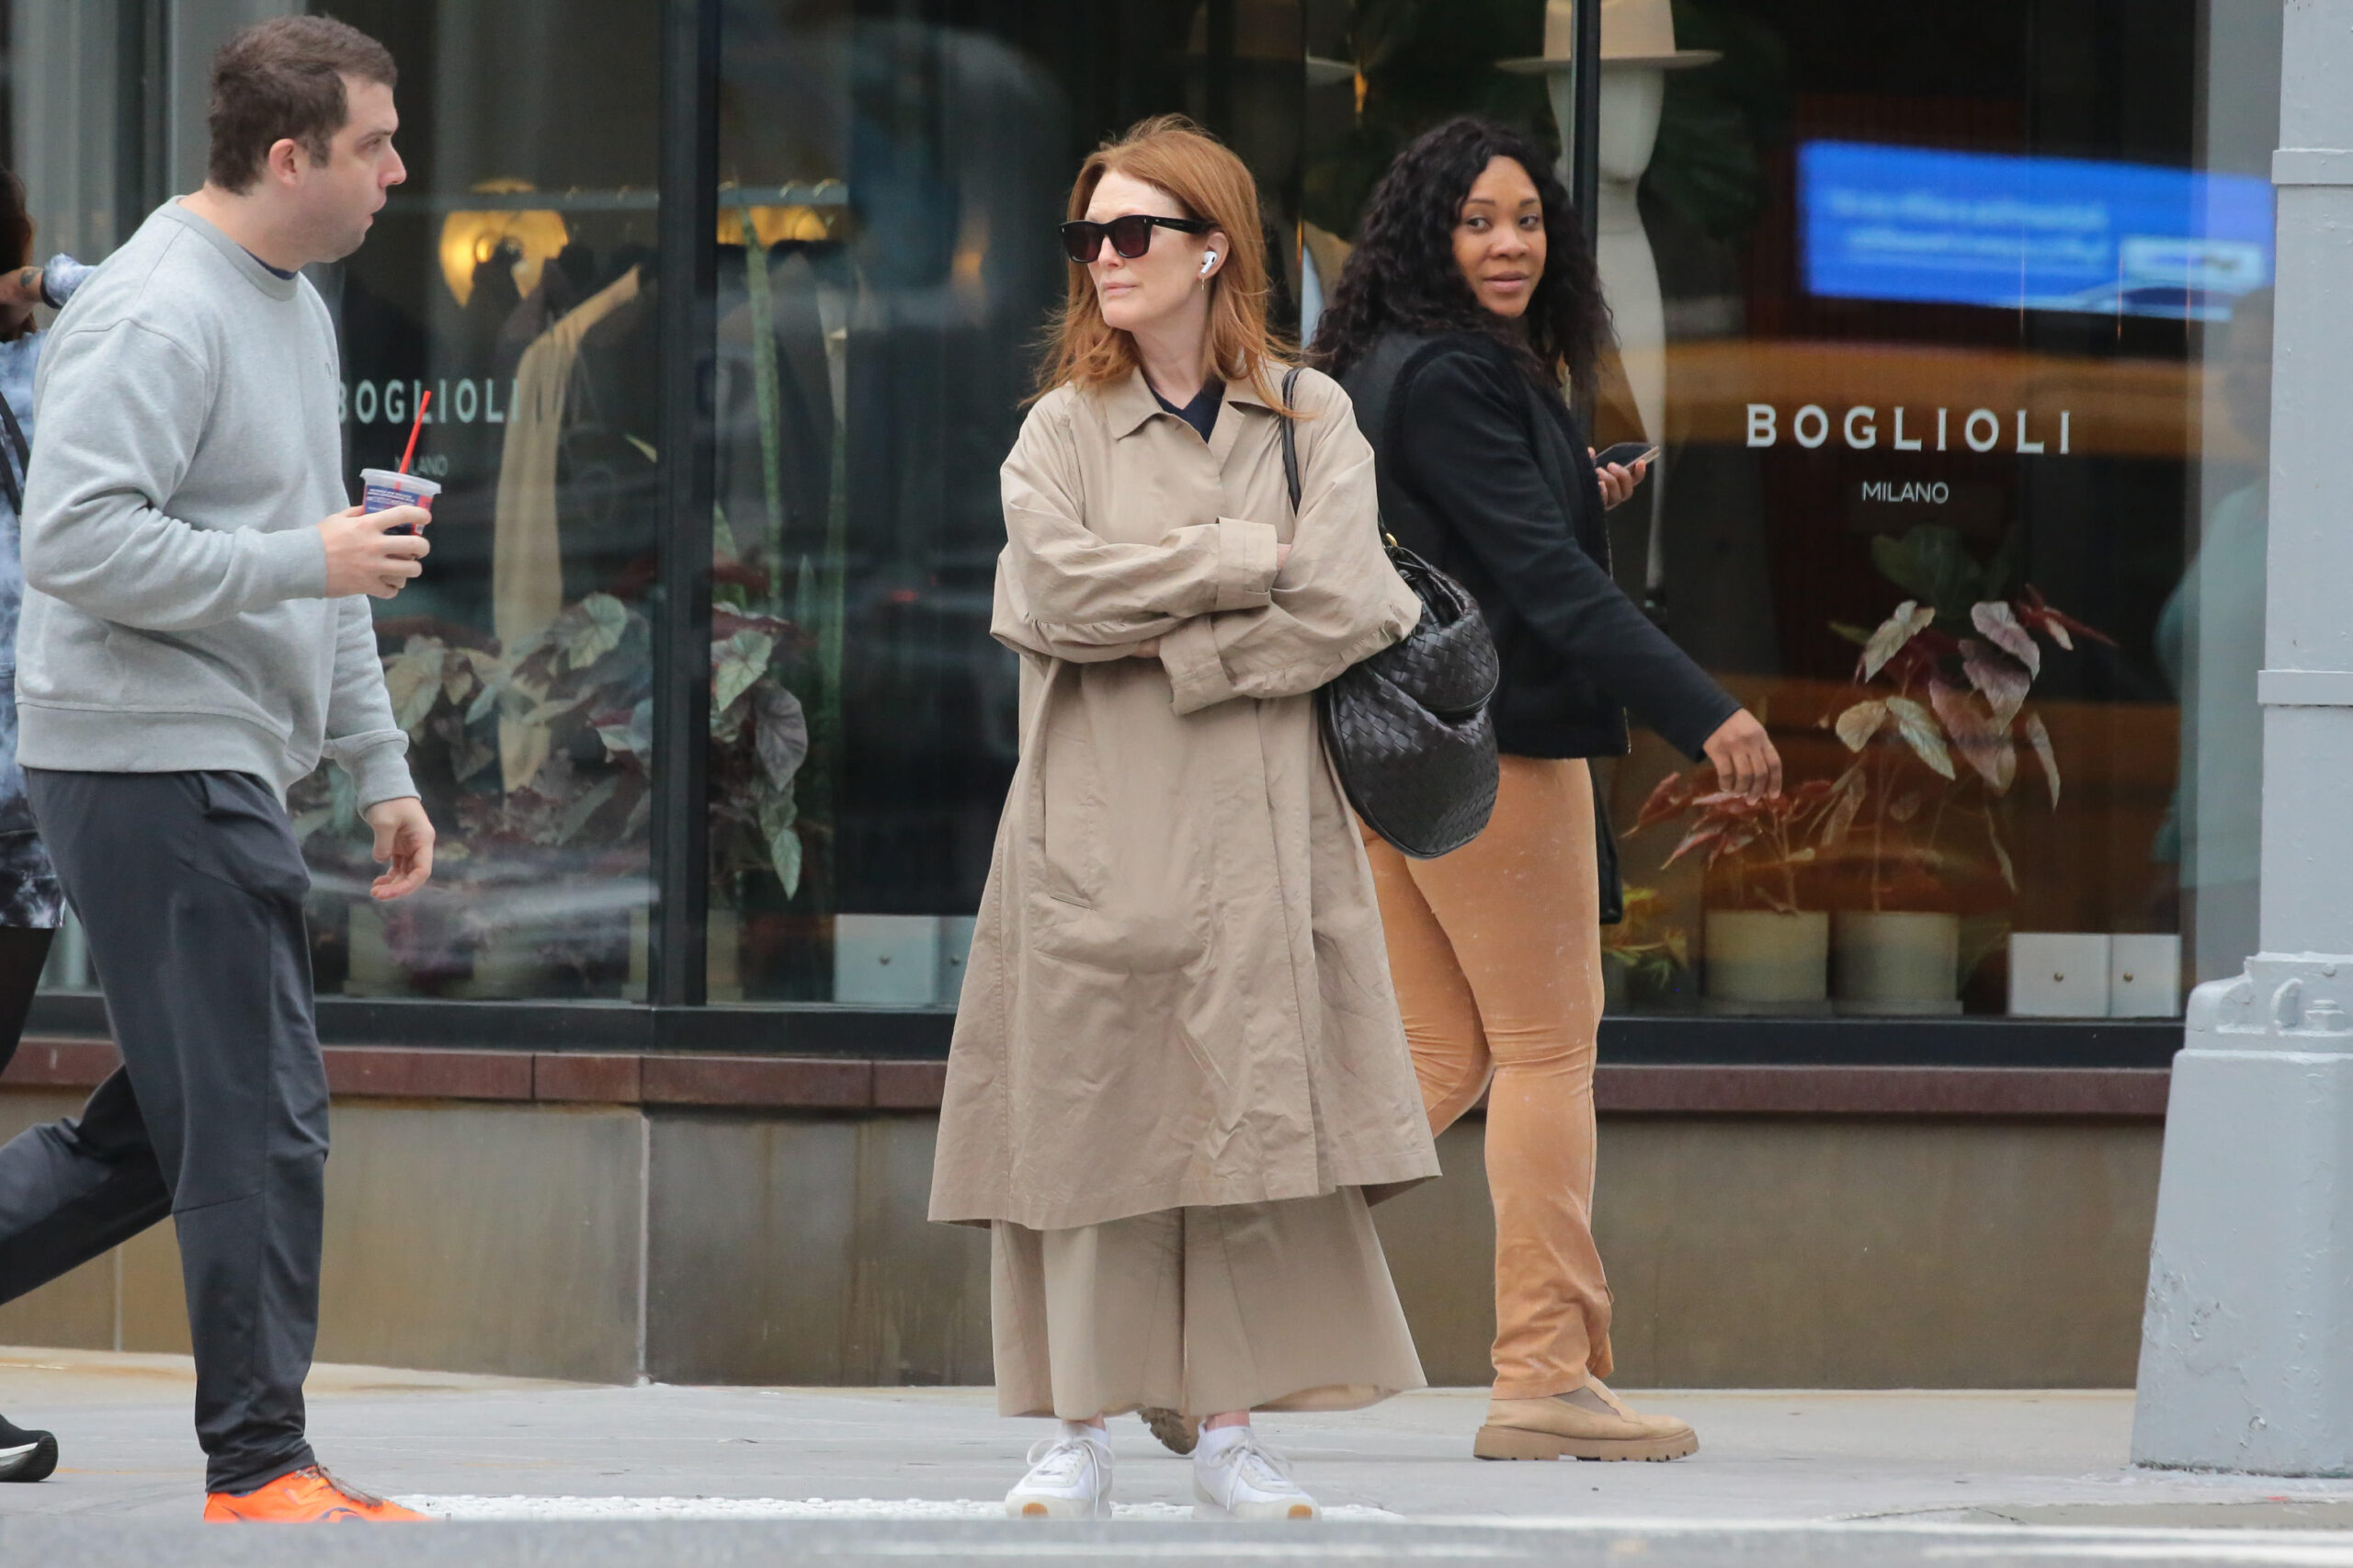 Julianne Moore effortlessly showcases the allure of Bottega Veneta's Gemelli handbag while out in the city. Elegance in every step. (Photo by Ignat/Bauer-Griffin/GC Images)